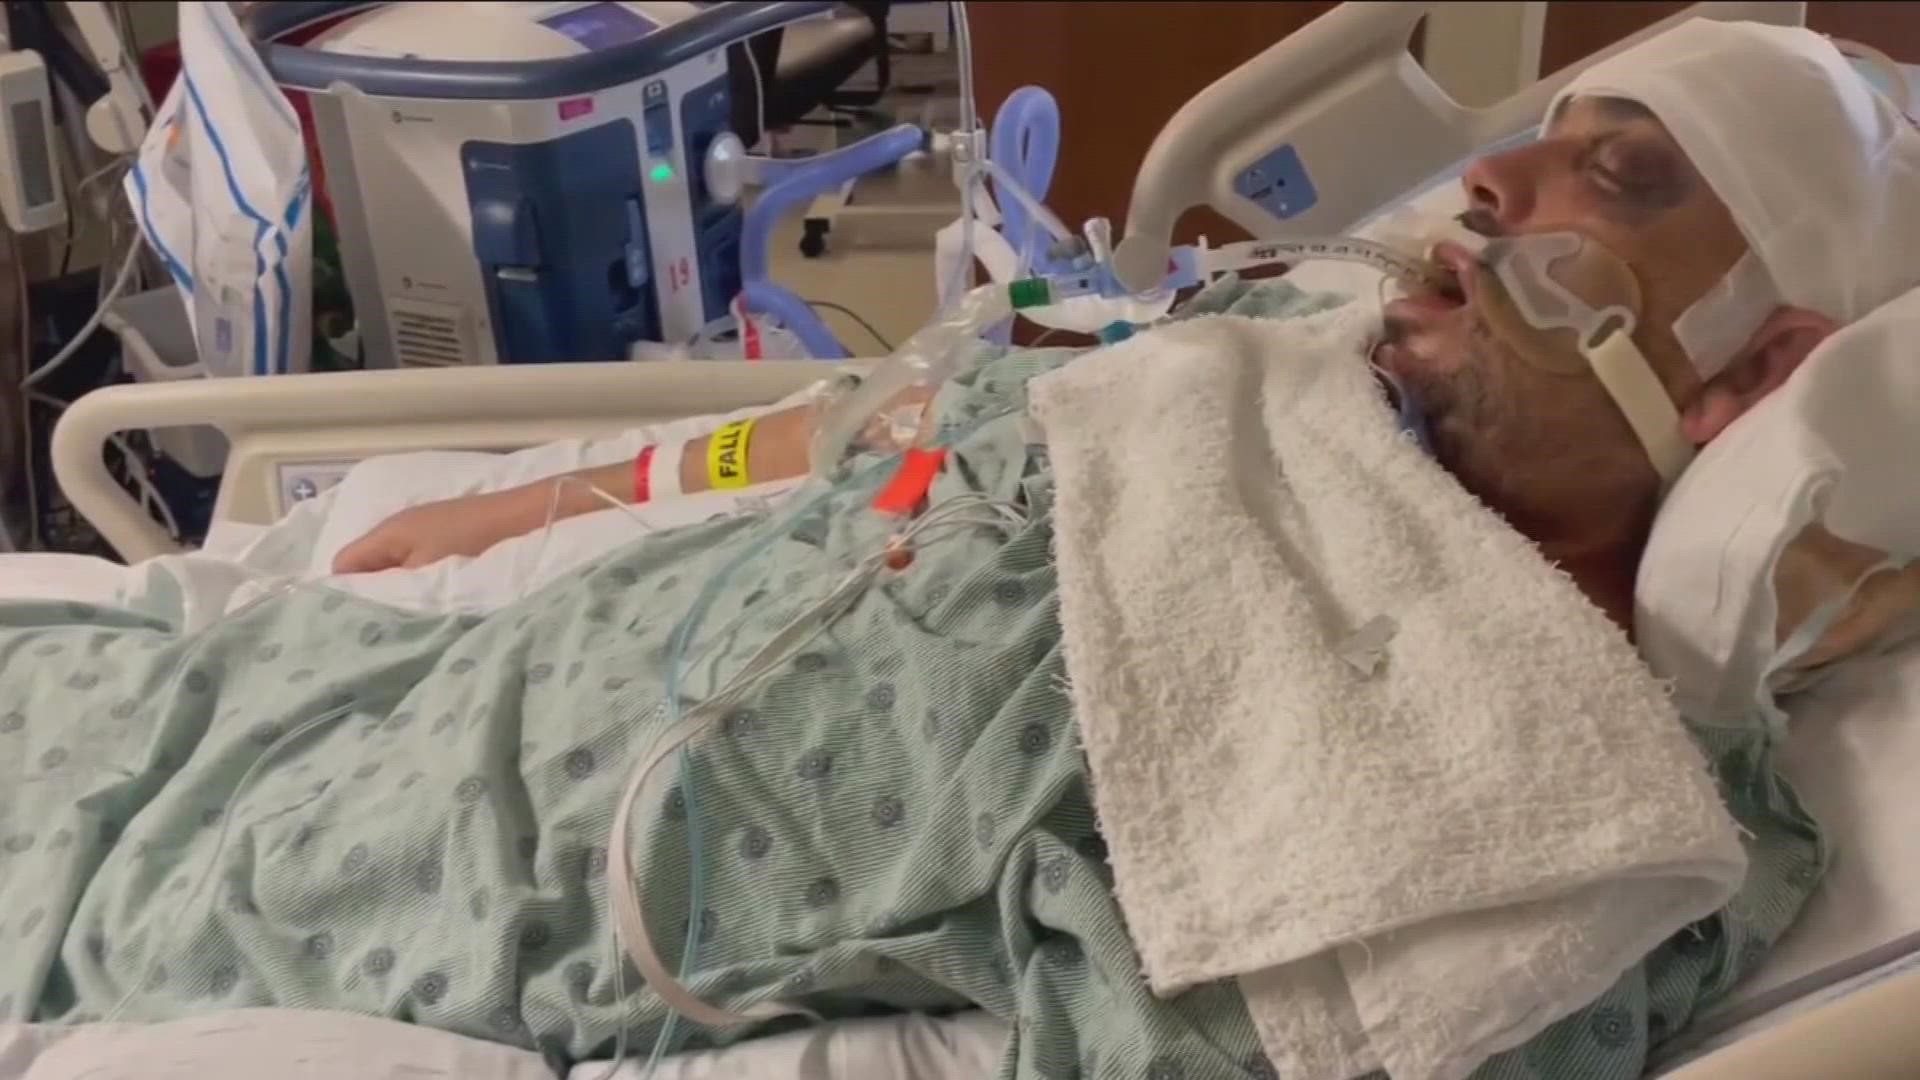 The man is reportedly in a coma after the jail said he fell out of a bunk bed, but his family says his injuries aren't consistent with falling.